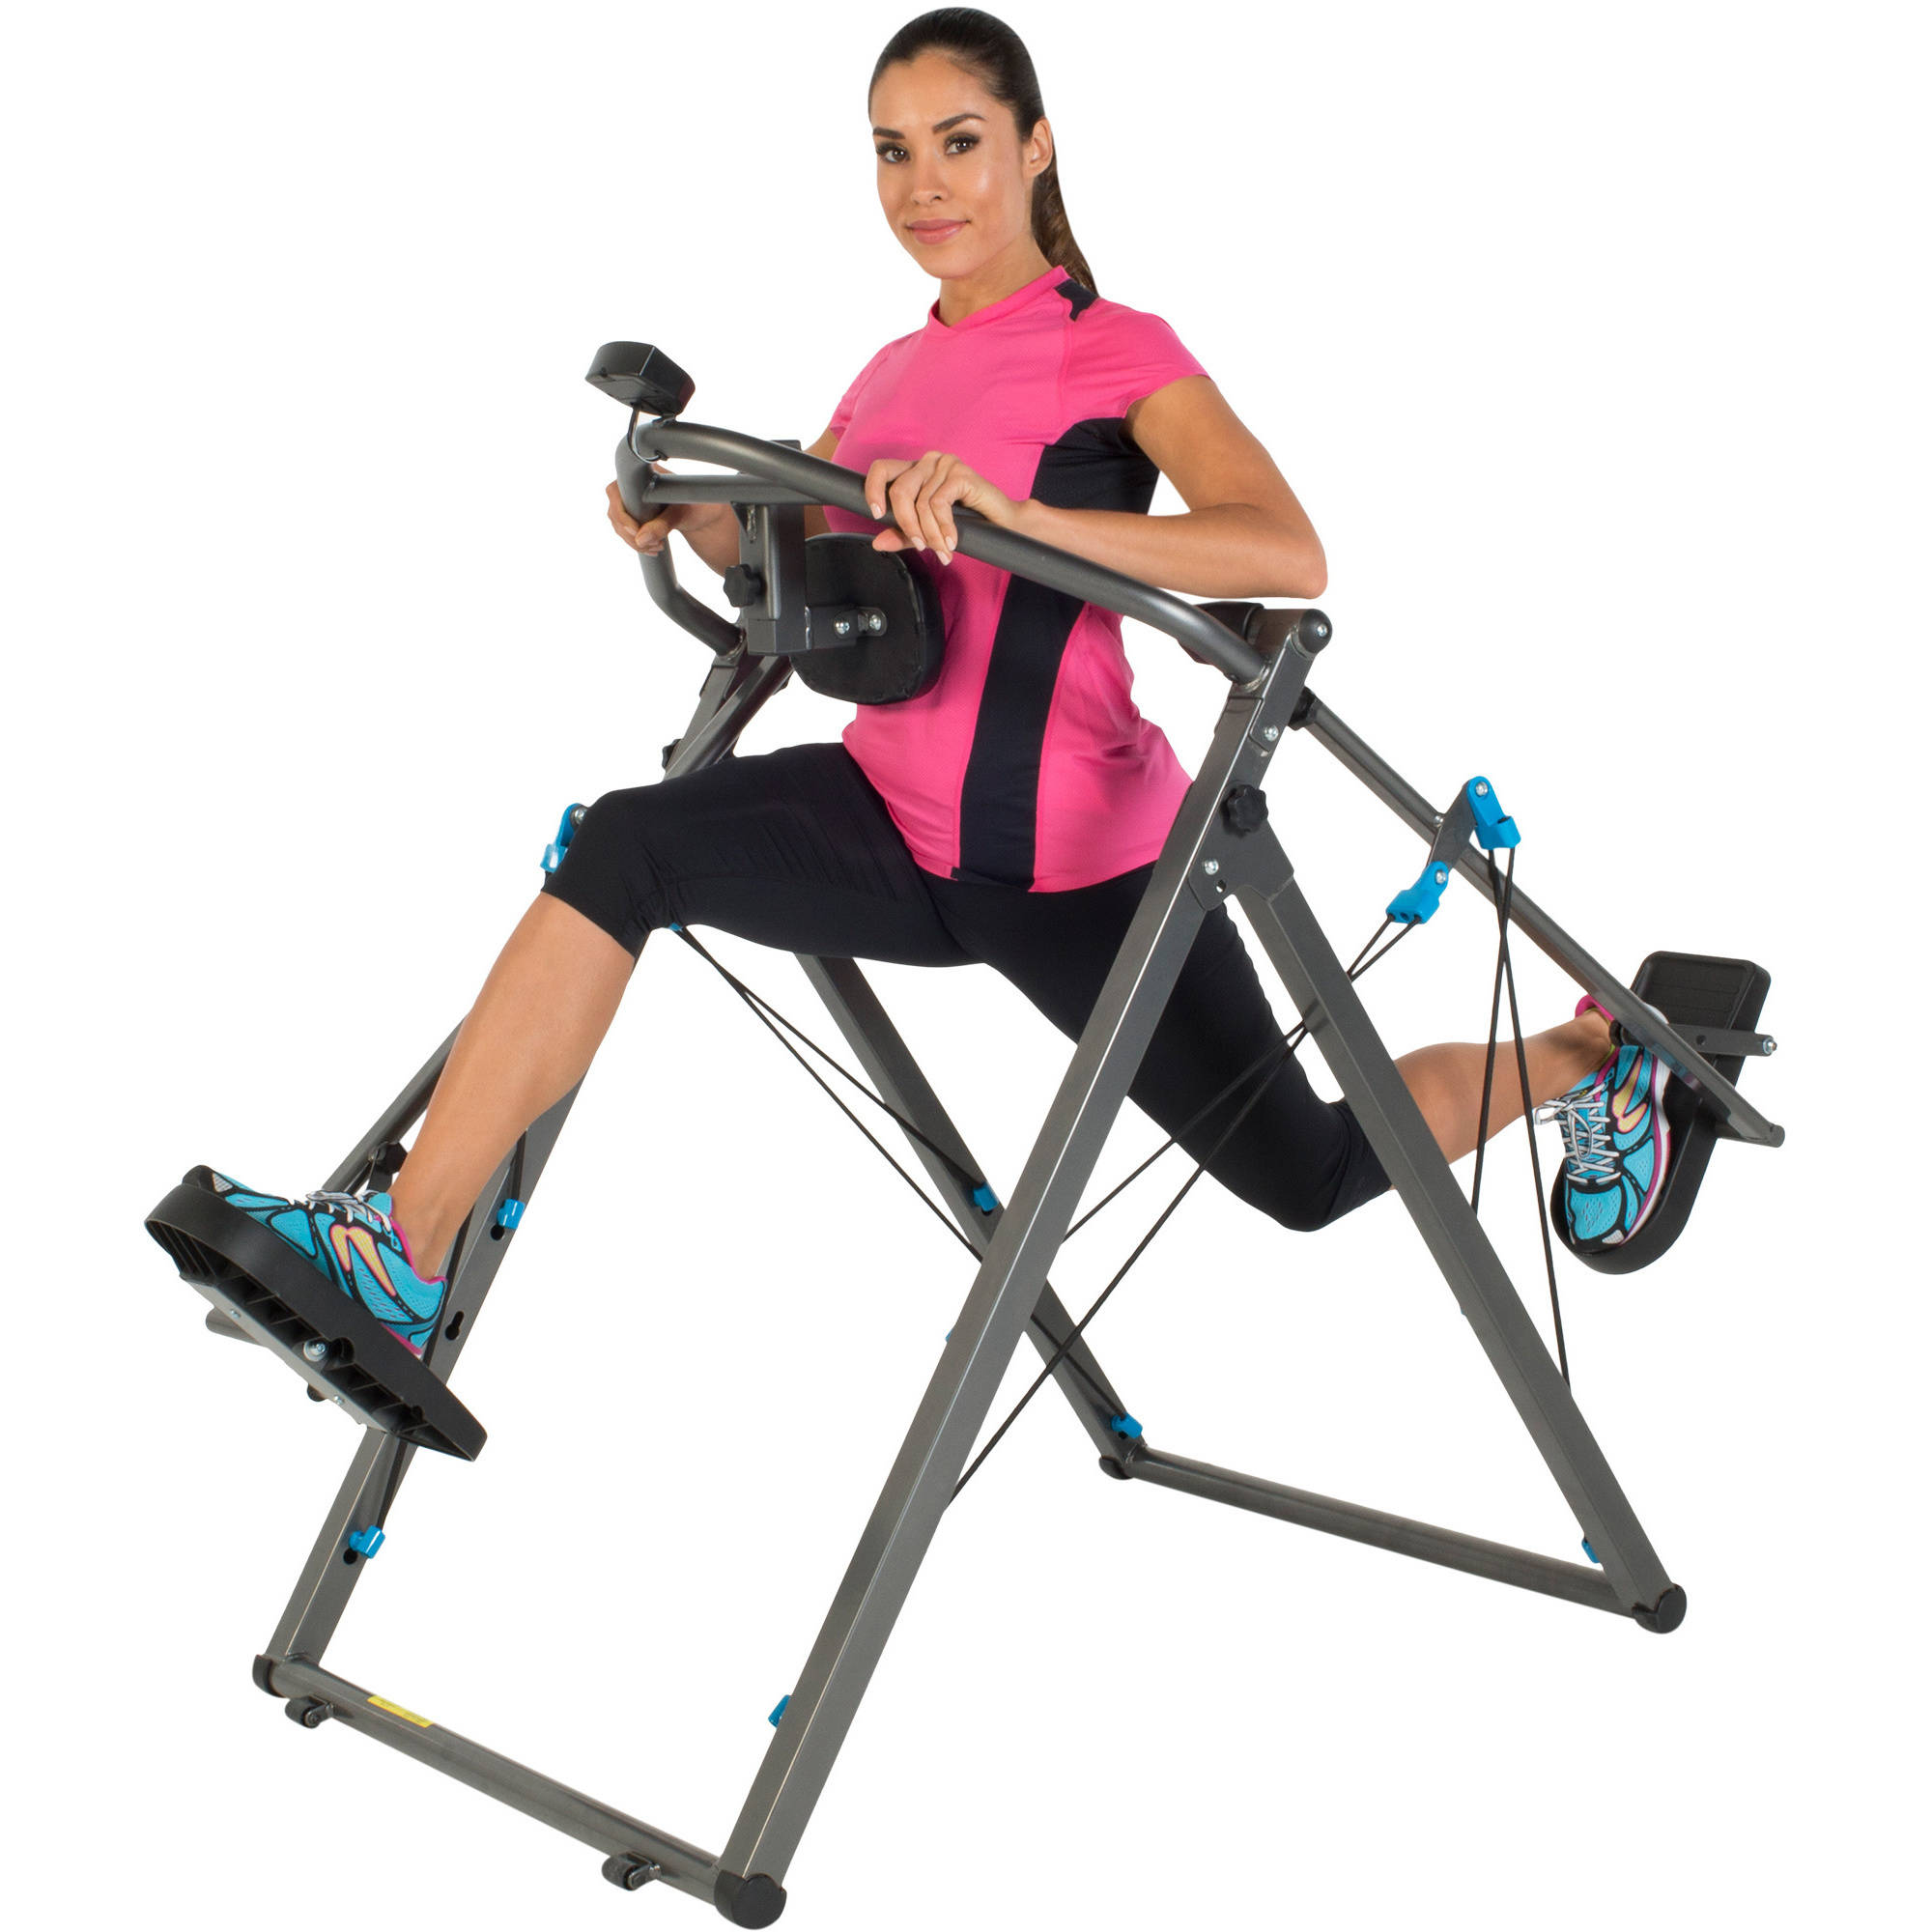 Fitness Reality Zero Impact 48" Stride Elliptical Cloud Walker X3 with Pulse Sensors - image 3 of 24